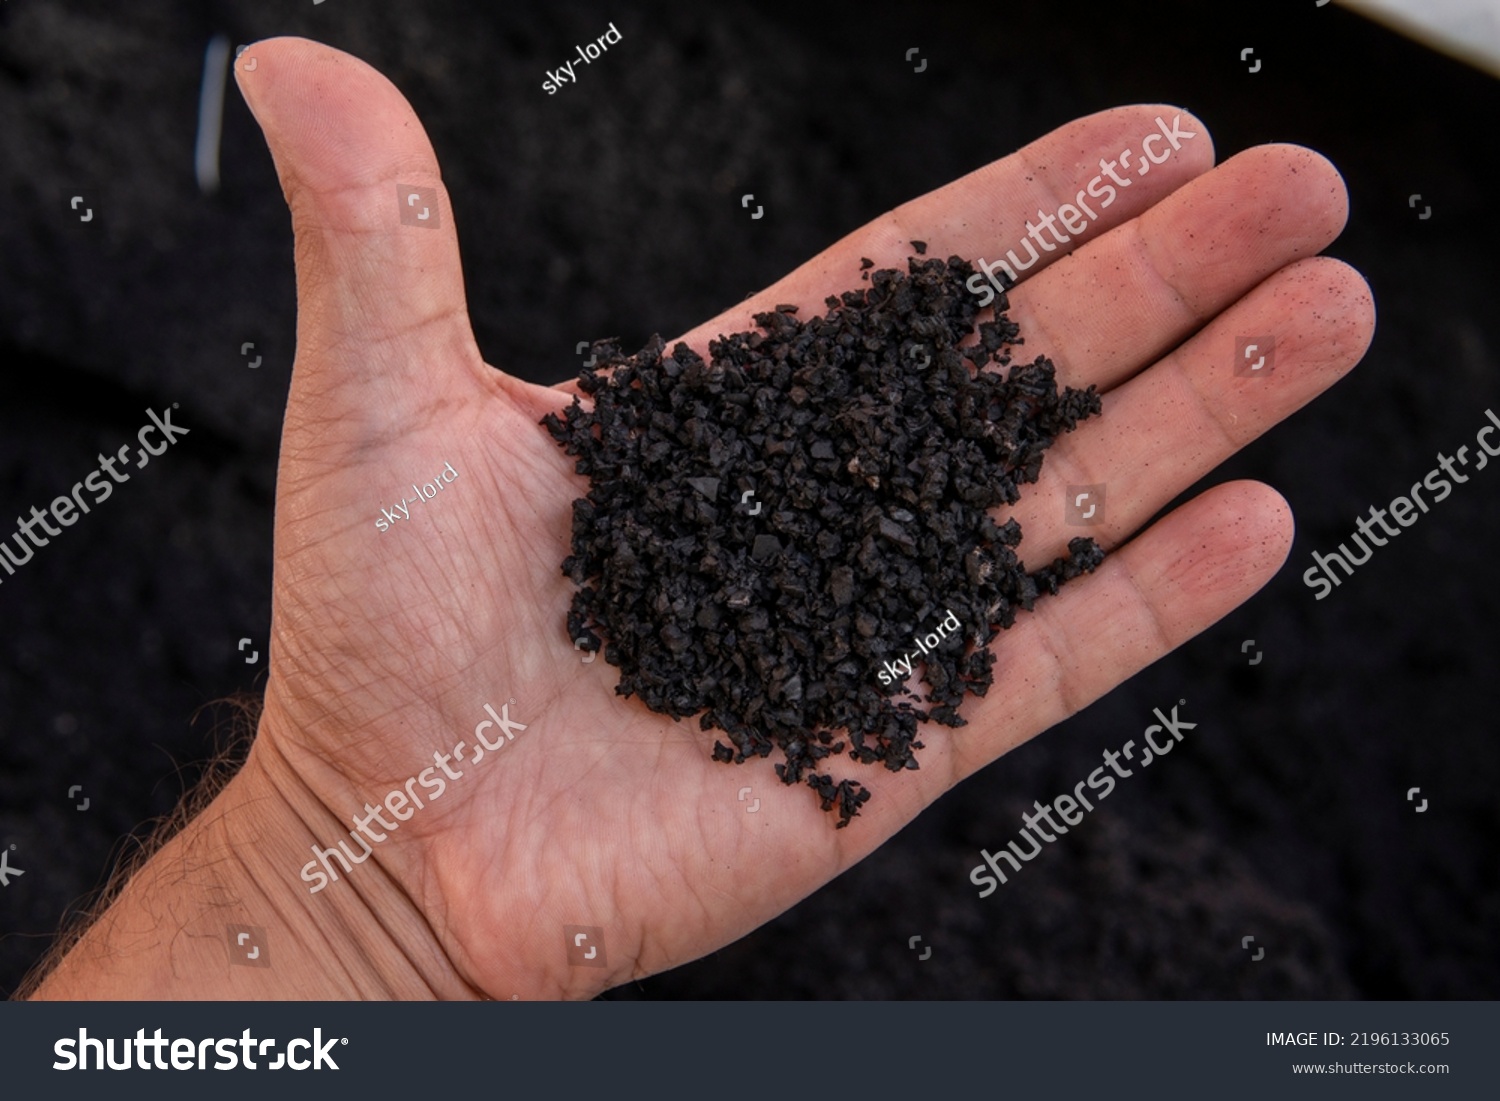 Recycled rubber in hand. Rubber crumb obtained in the process of recycling used car tires used for flooring sports and playgrounds. #2196133065